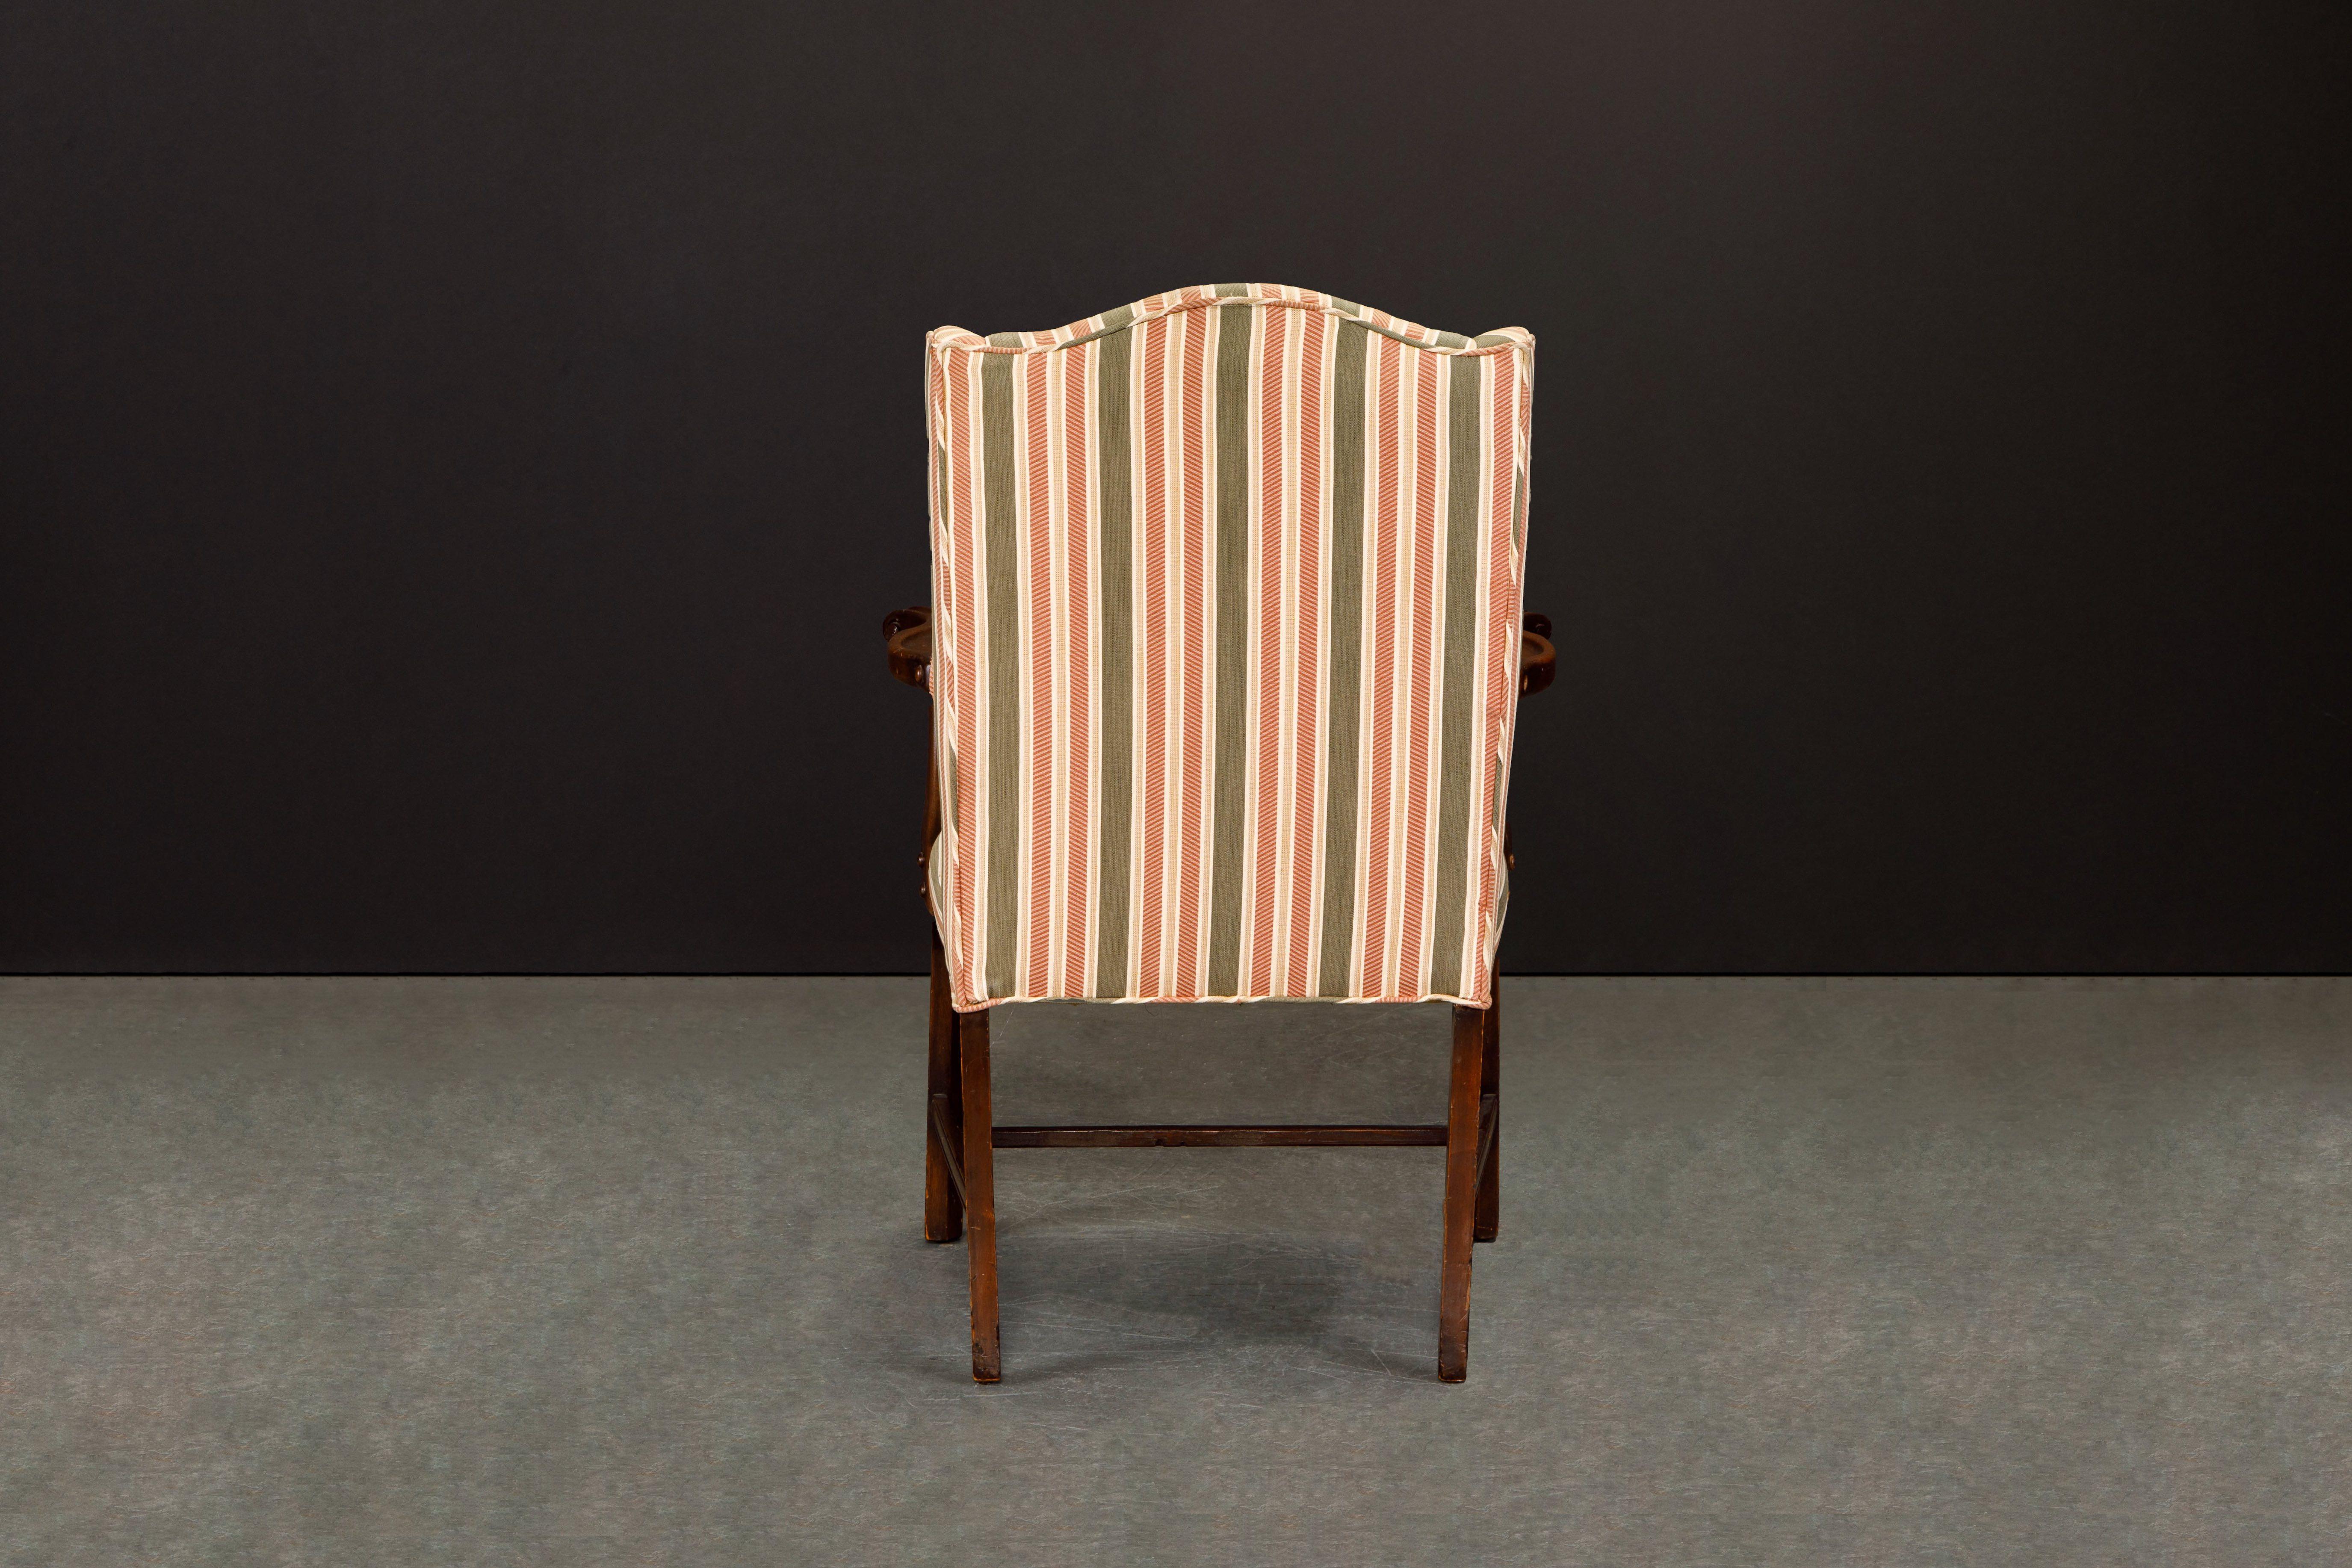 20th Century Gainsborough Wingback Armchair Upholstered in Striped Fabric